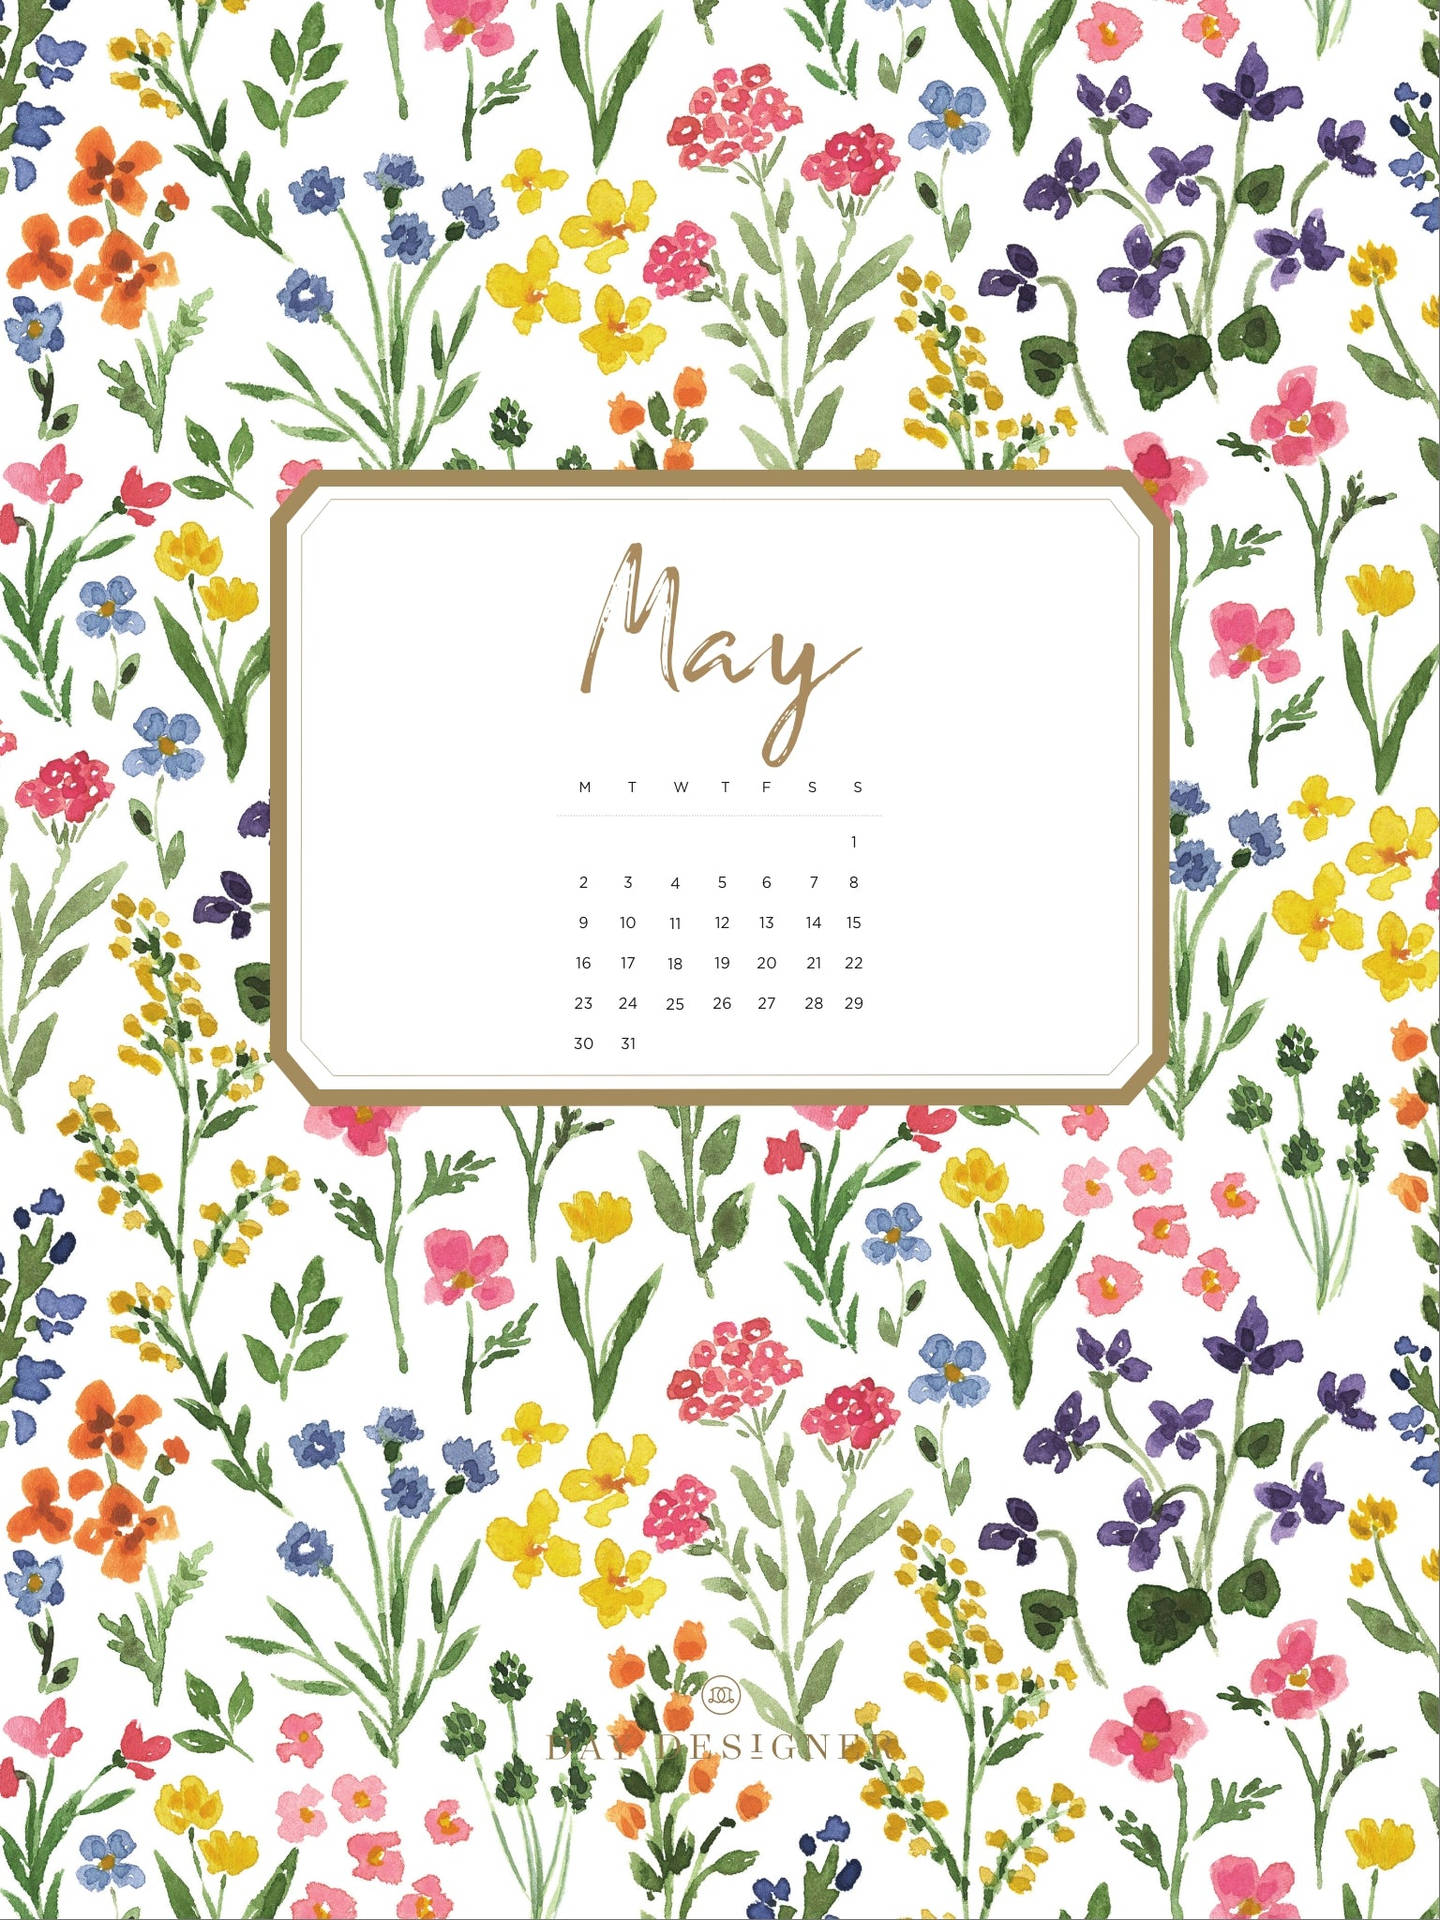 May 2022 Calendar Floral Art Pattern Background